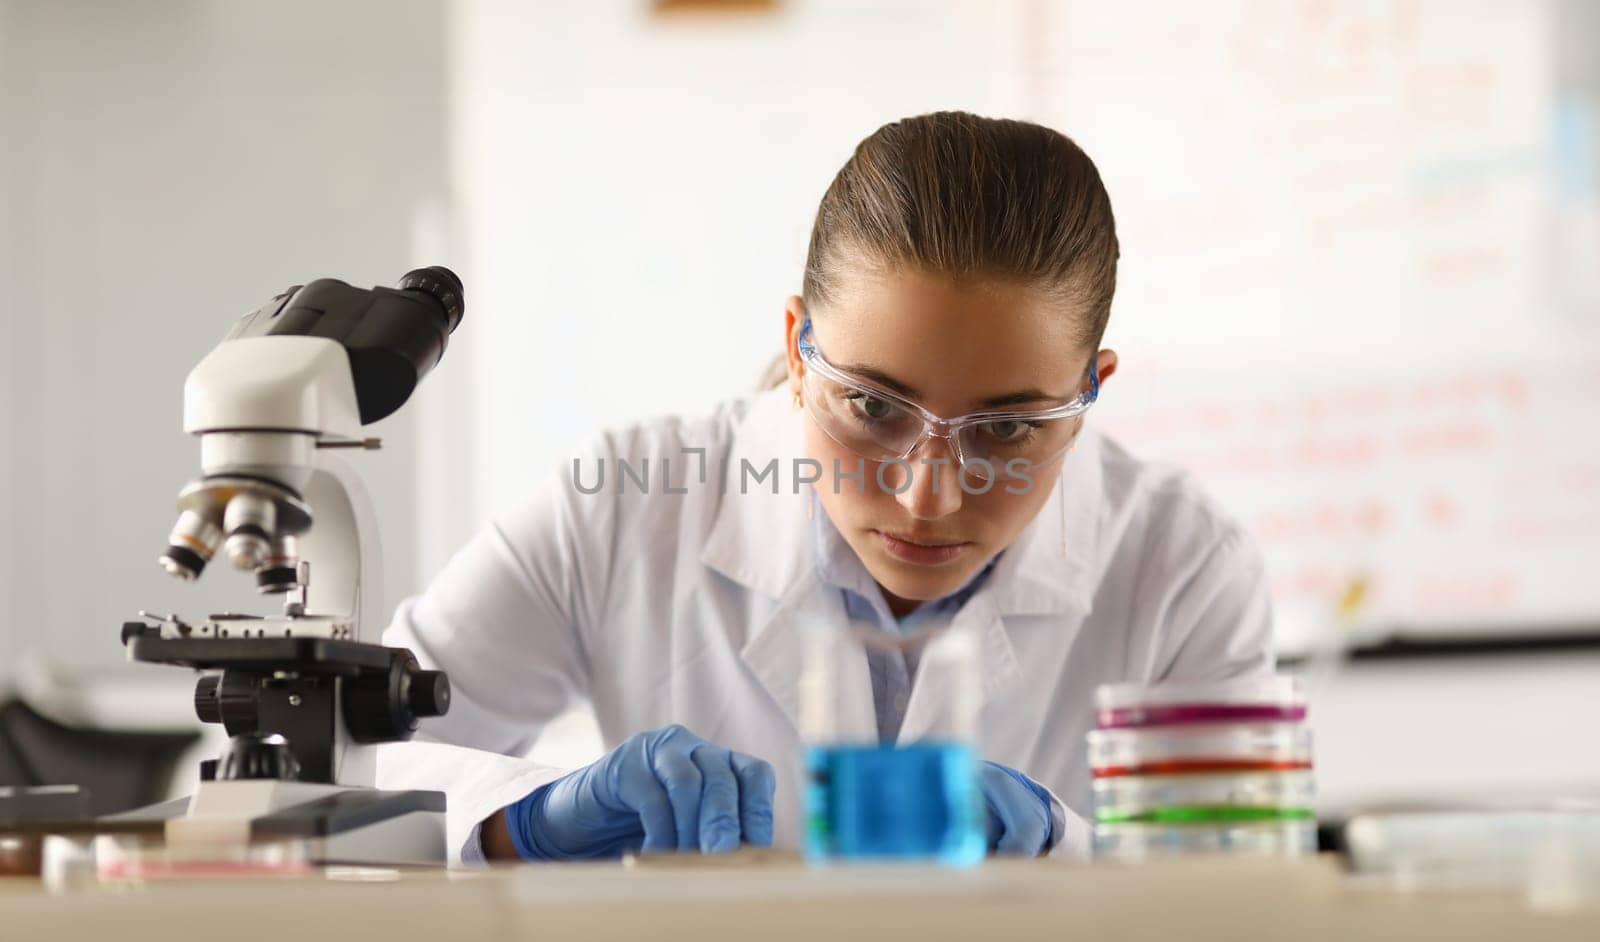 Woman chemist conducting scientific experiments in laboratory. Chemical education concept